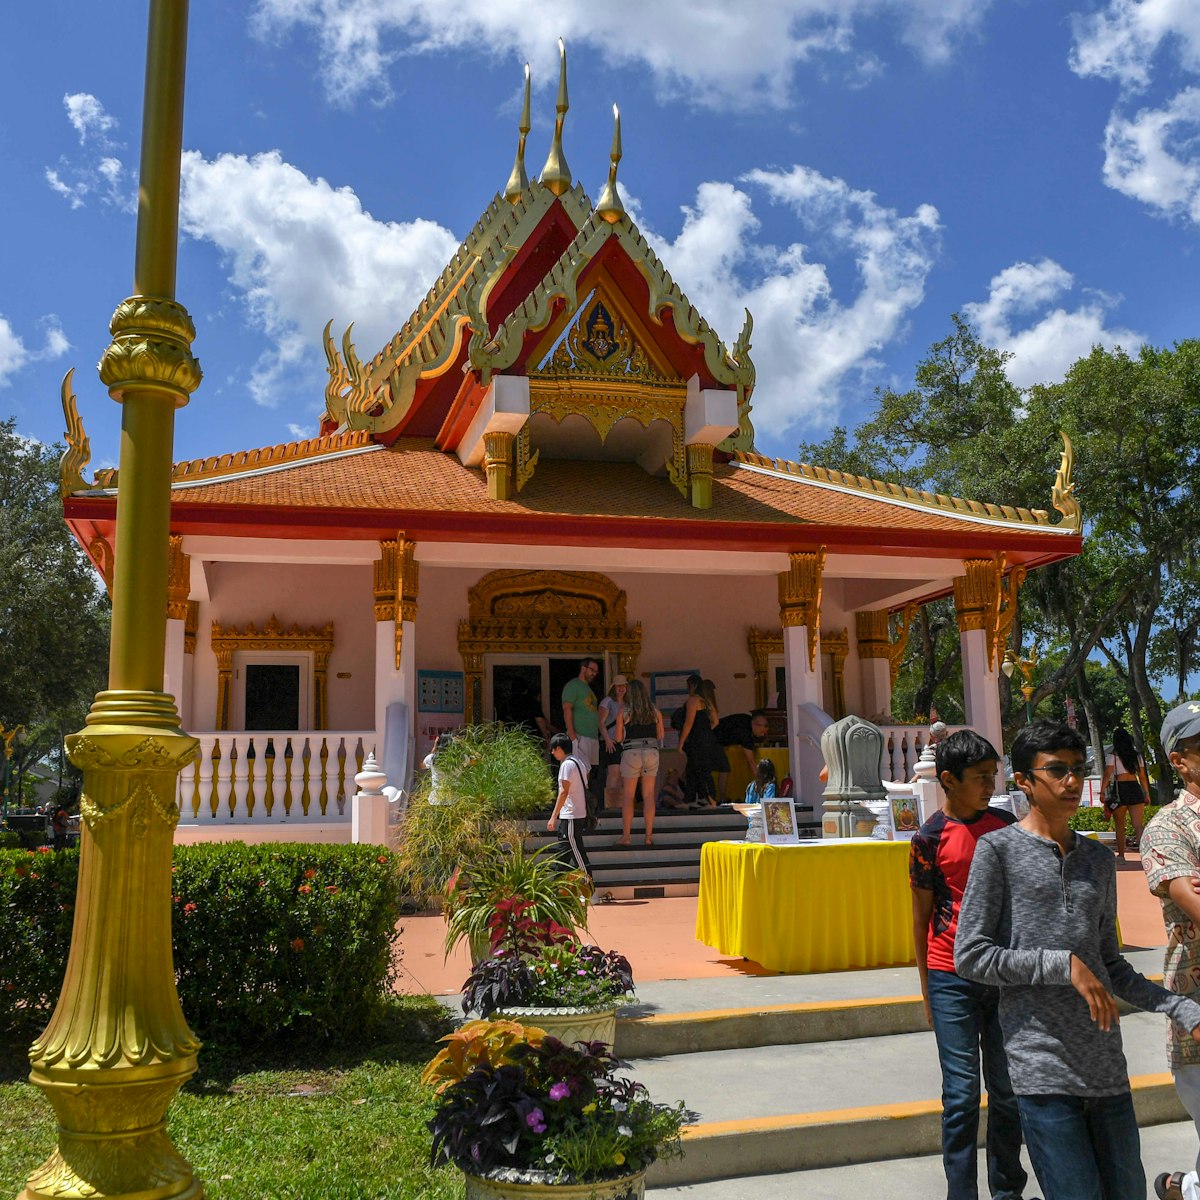 People visit the market held at Wat Mongkolratanaram, a Buddhist temple, on Sunday, May 19, 2019 in Tampa. On Sundays, the temple holds a market for people of all religions and backgrounds to visit. Credit: Allie Goulding/Tampa Bay Times/ZUMA Wire/Alamy Live News